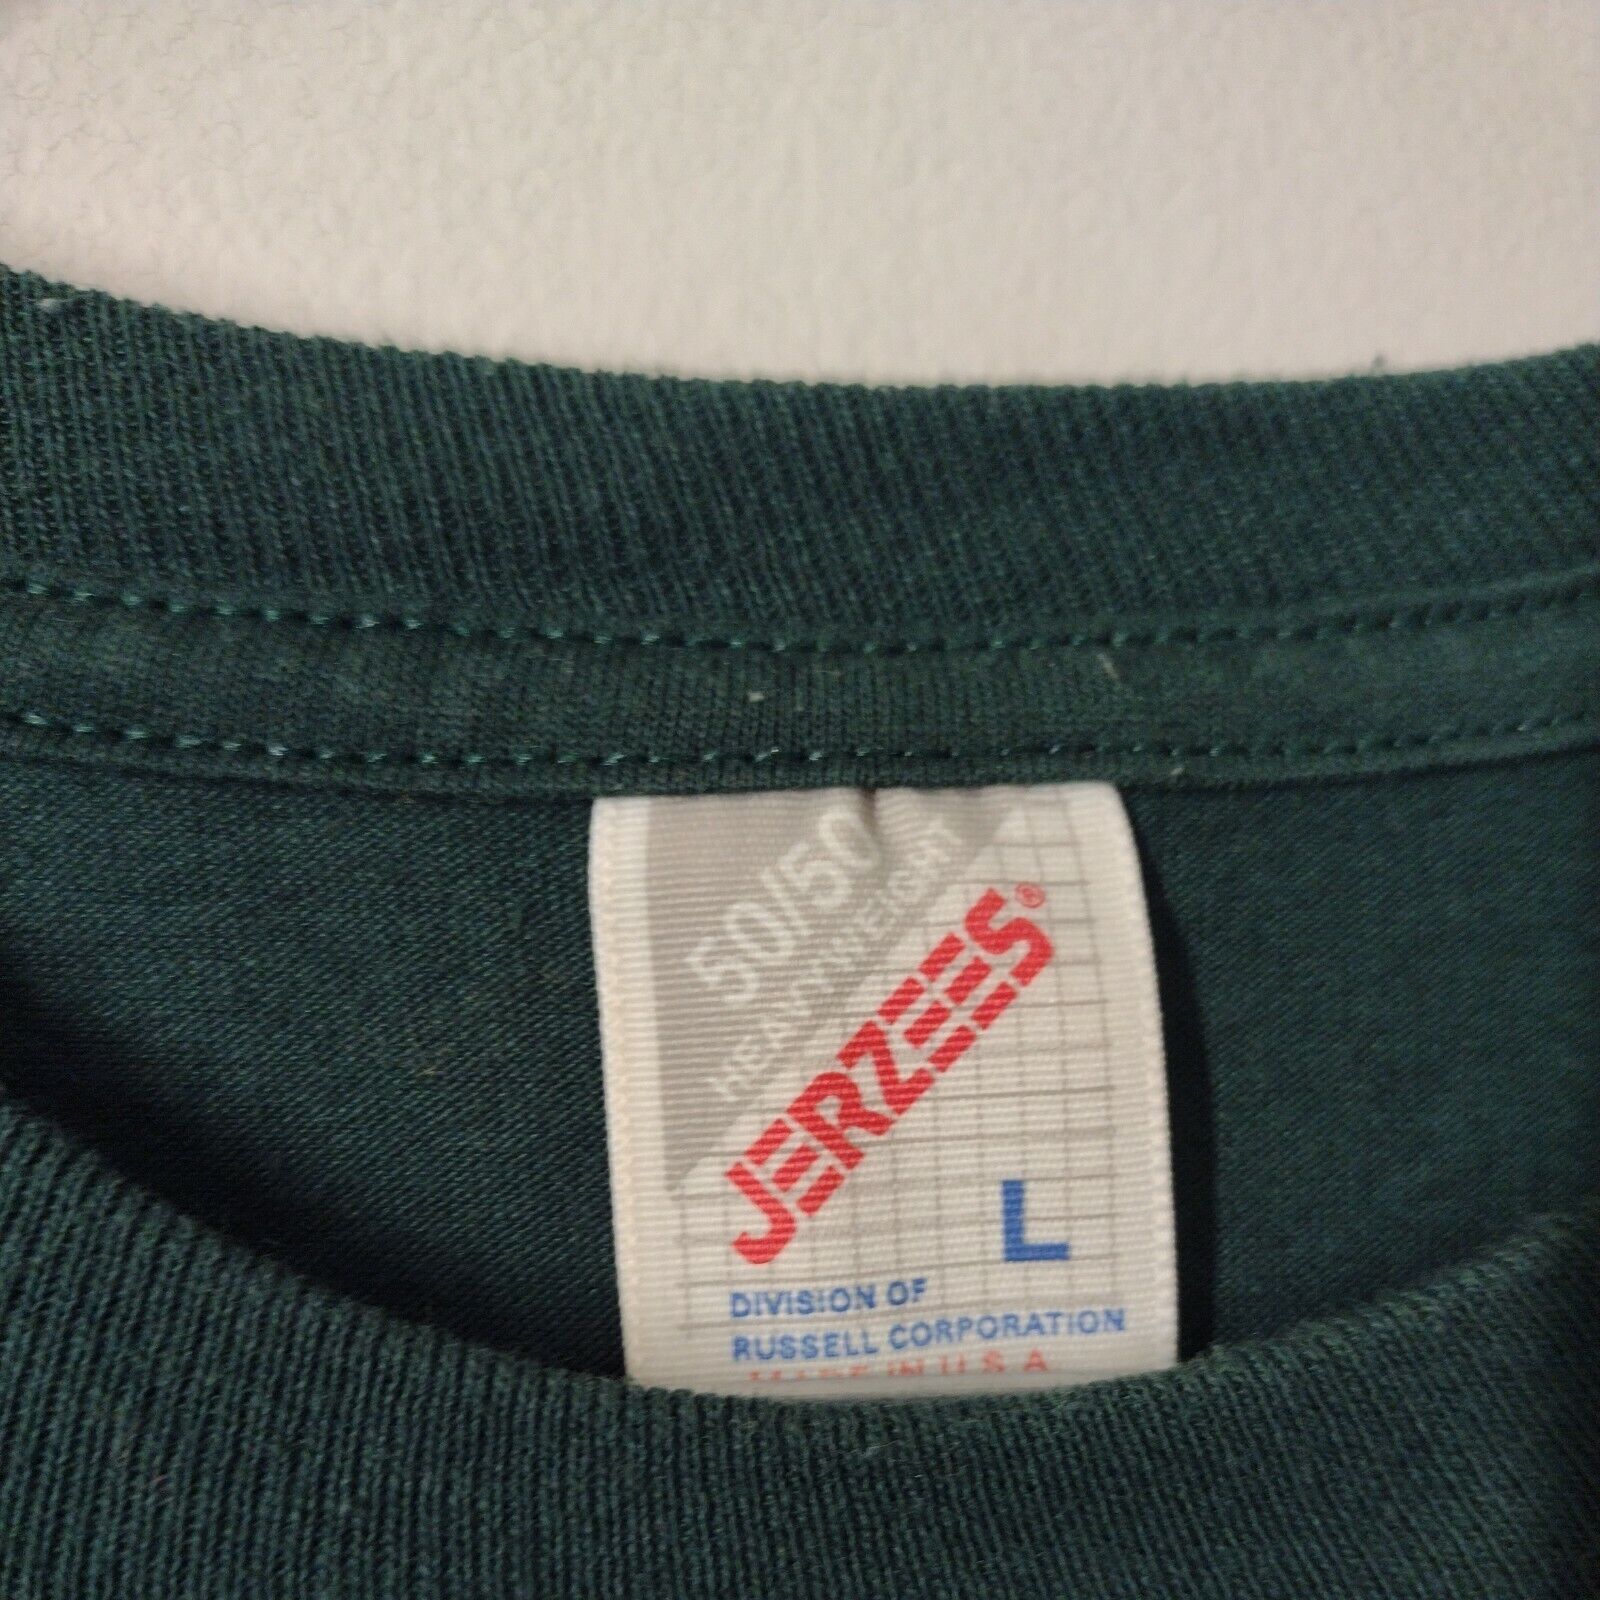 Vintage Jerzees Tag - 50/50 Cotton Poly - Green - 